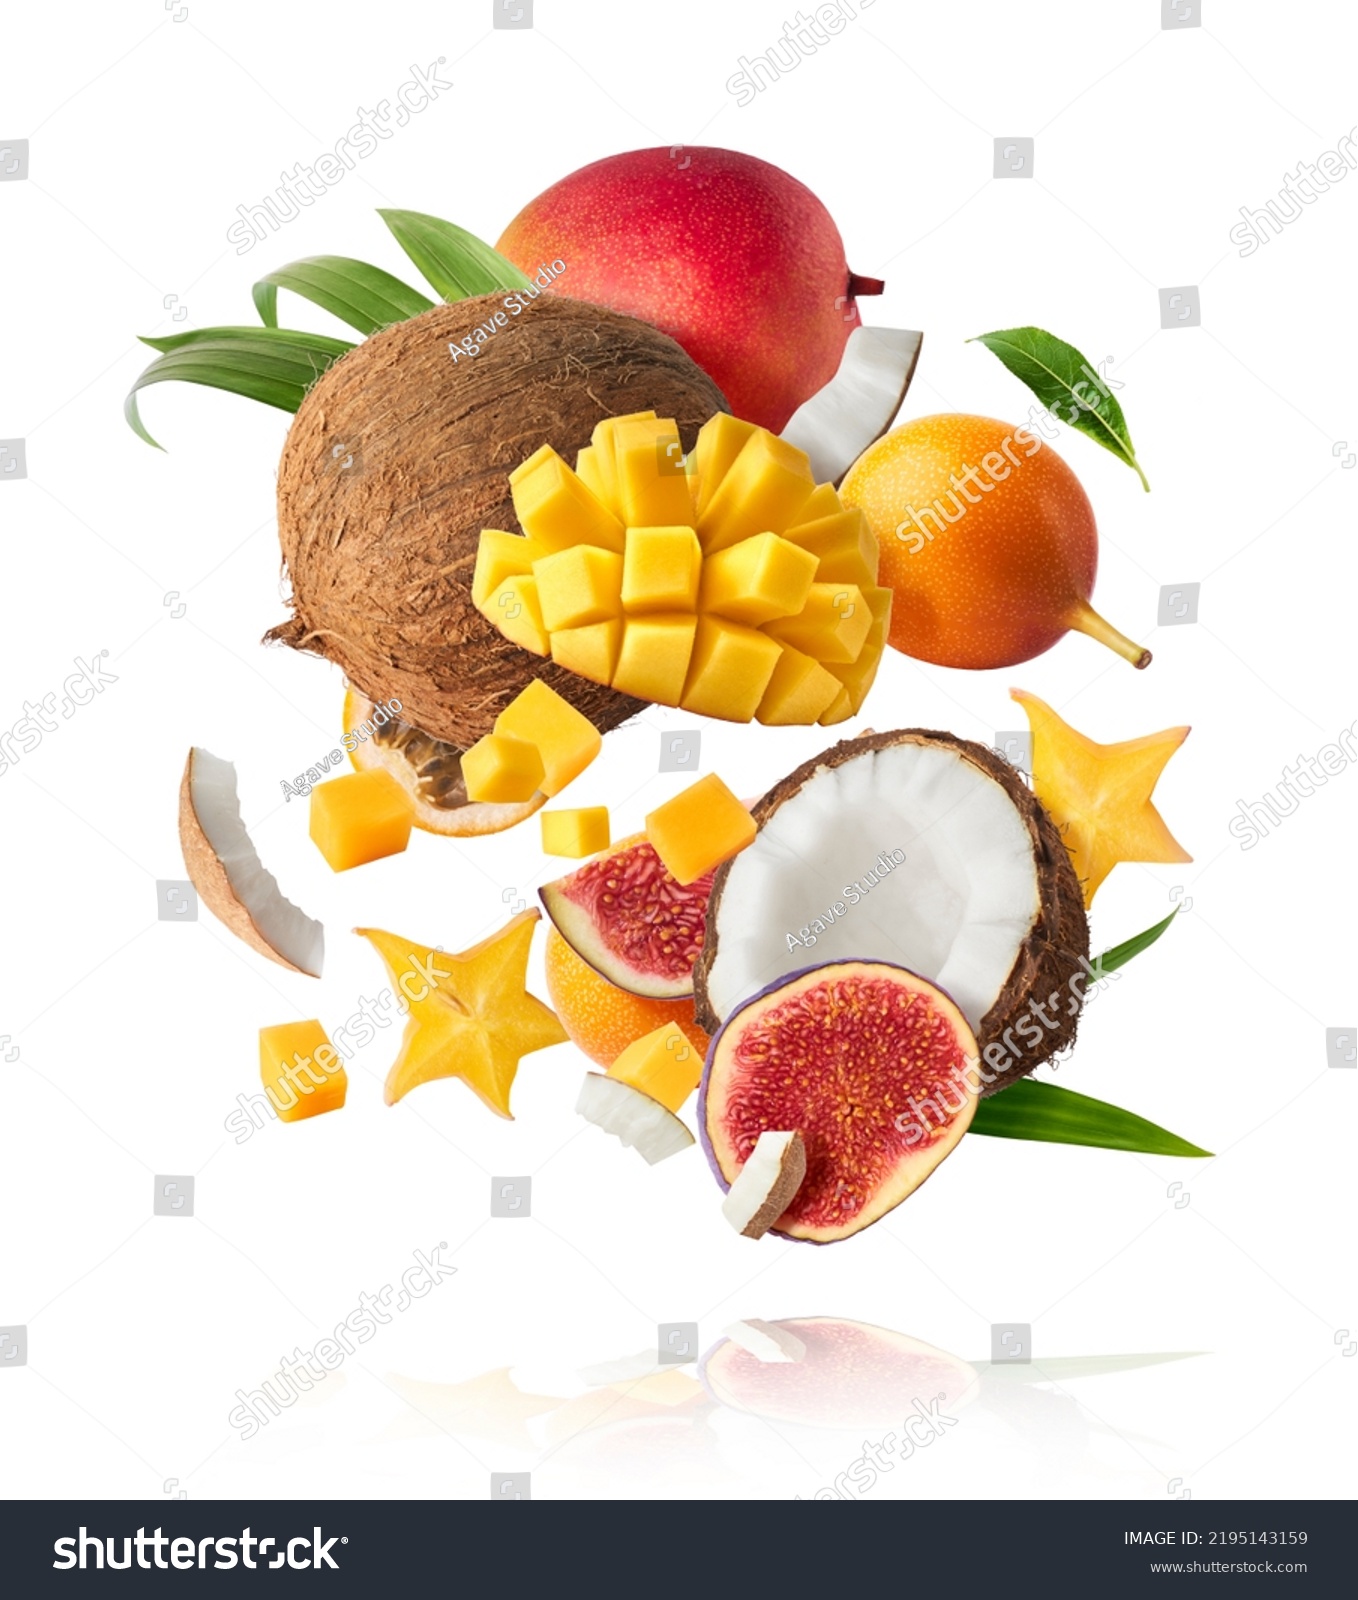 Exotic fruit mix, coconuts, mango, fig, passiflora, carambola falling in te air isolated on white background. Food levitation, zero gravity conception. High resolution image #2195143159